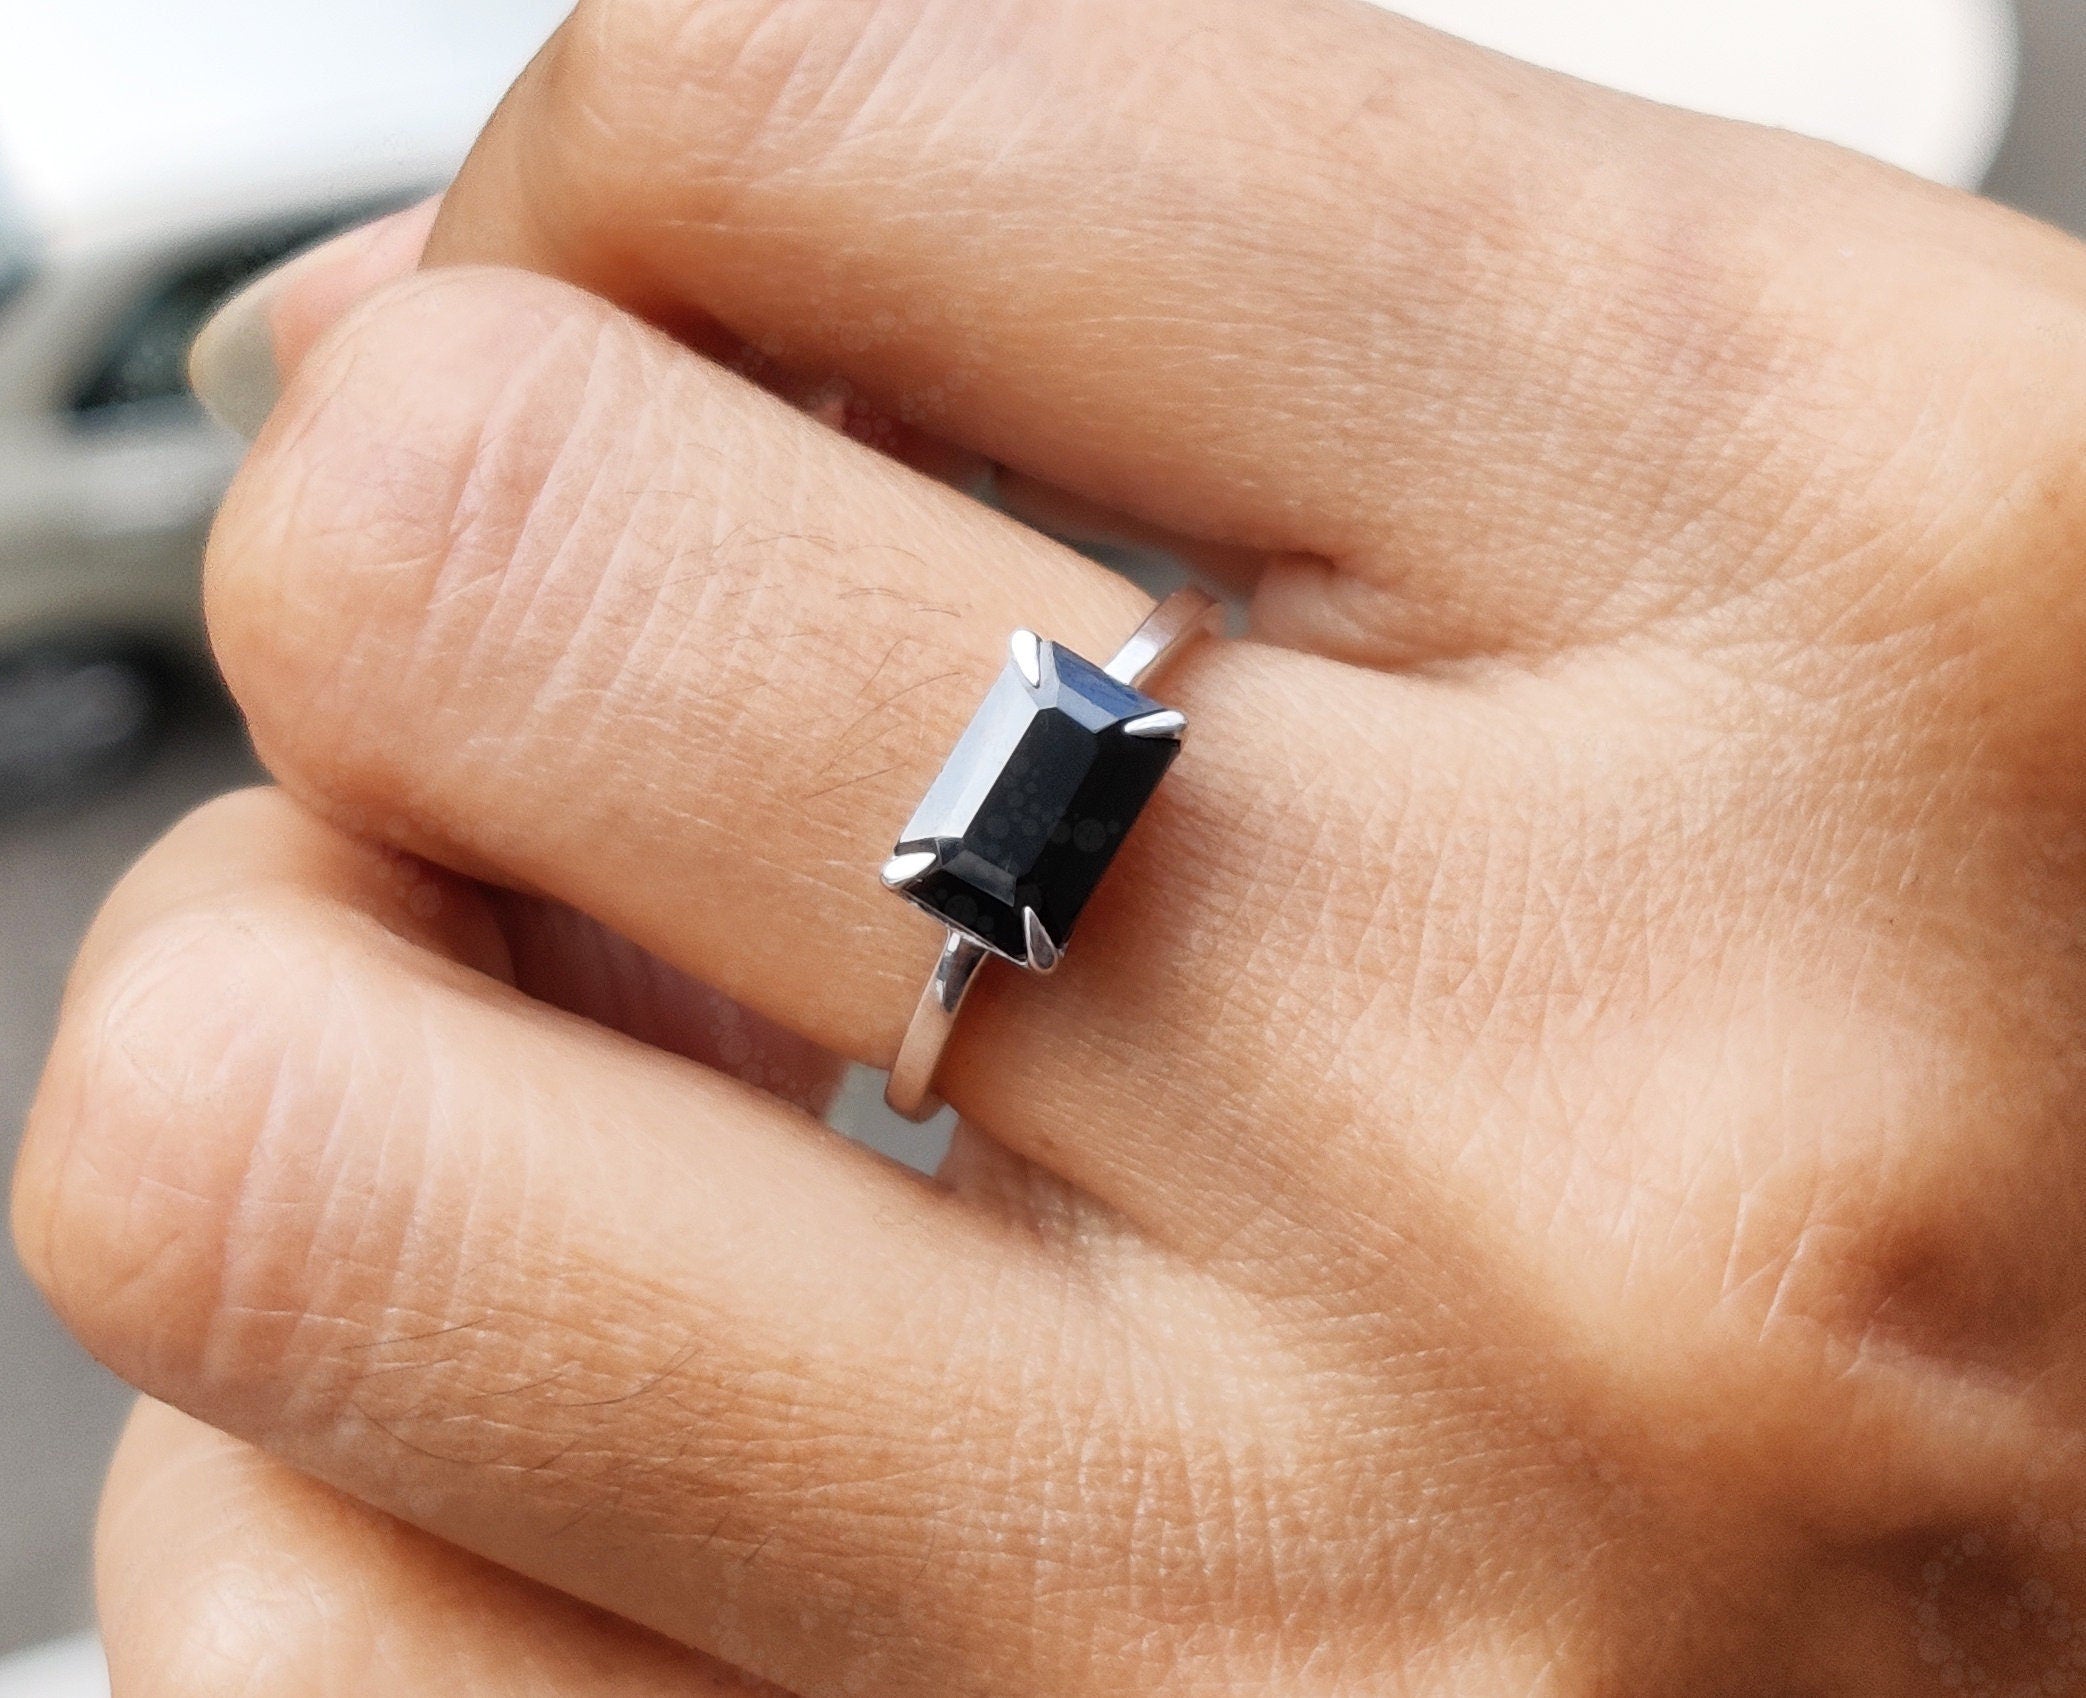 Onyx Elegance: Black Onyx Solitaire Engagement Ring, a Minimalist Silver and Gold Women's Ring for Timeless Elegance